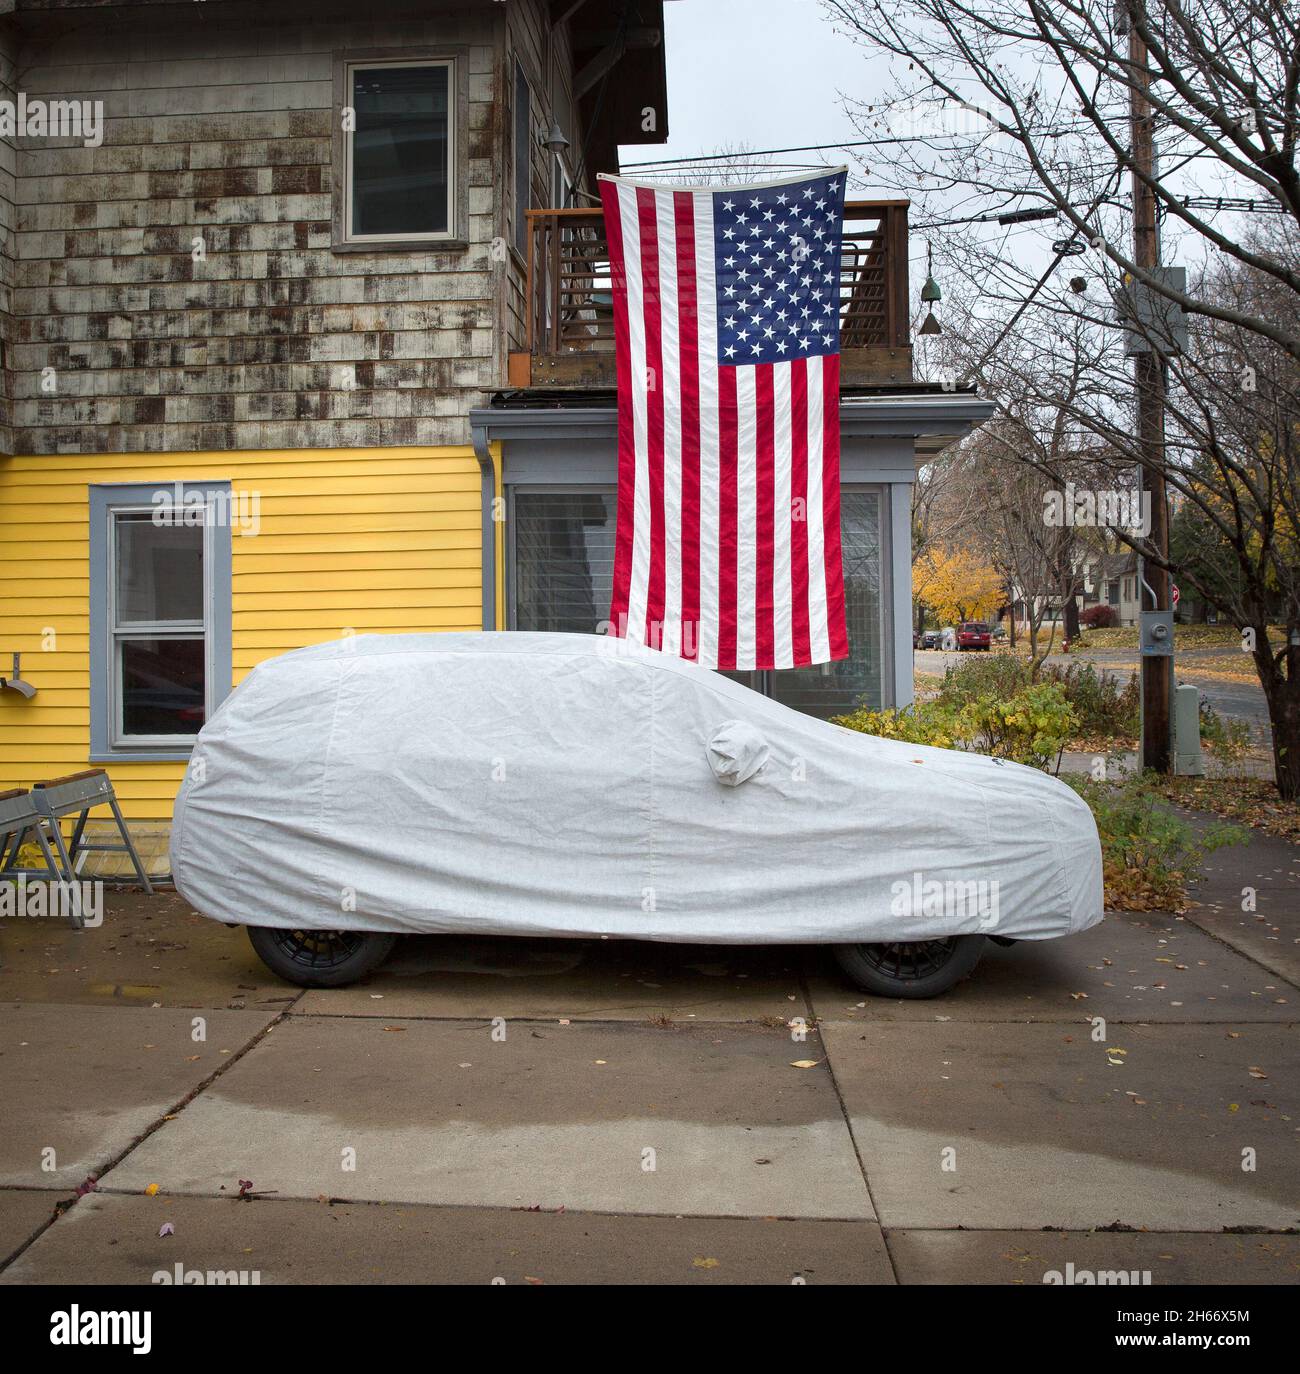 American Veteran's Day and federal holiday display of a large United States flag over a car with a protective cover. Veterans day, Armistice Day is th Stock Photo